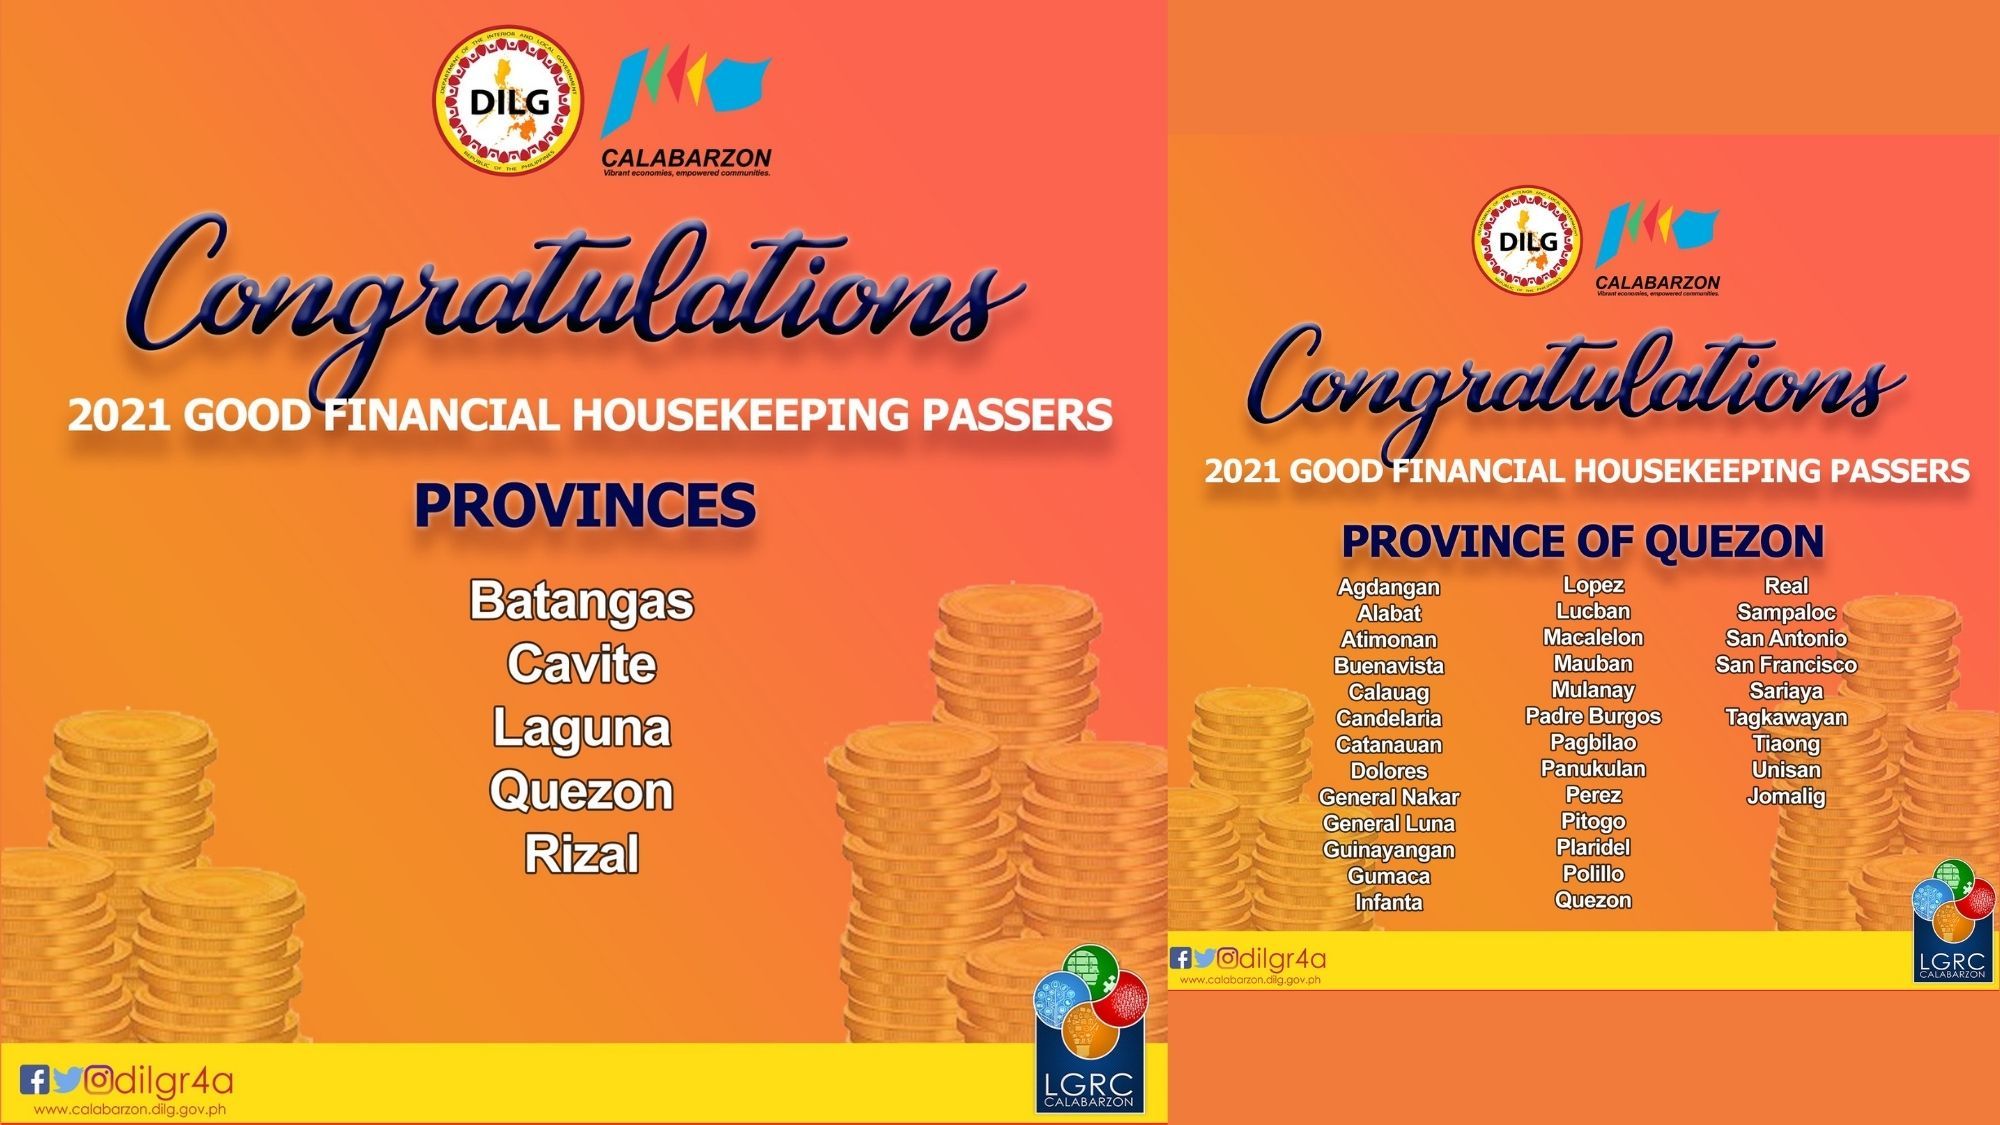 Quezon province earns ‘Seal of Good Housekeeping’